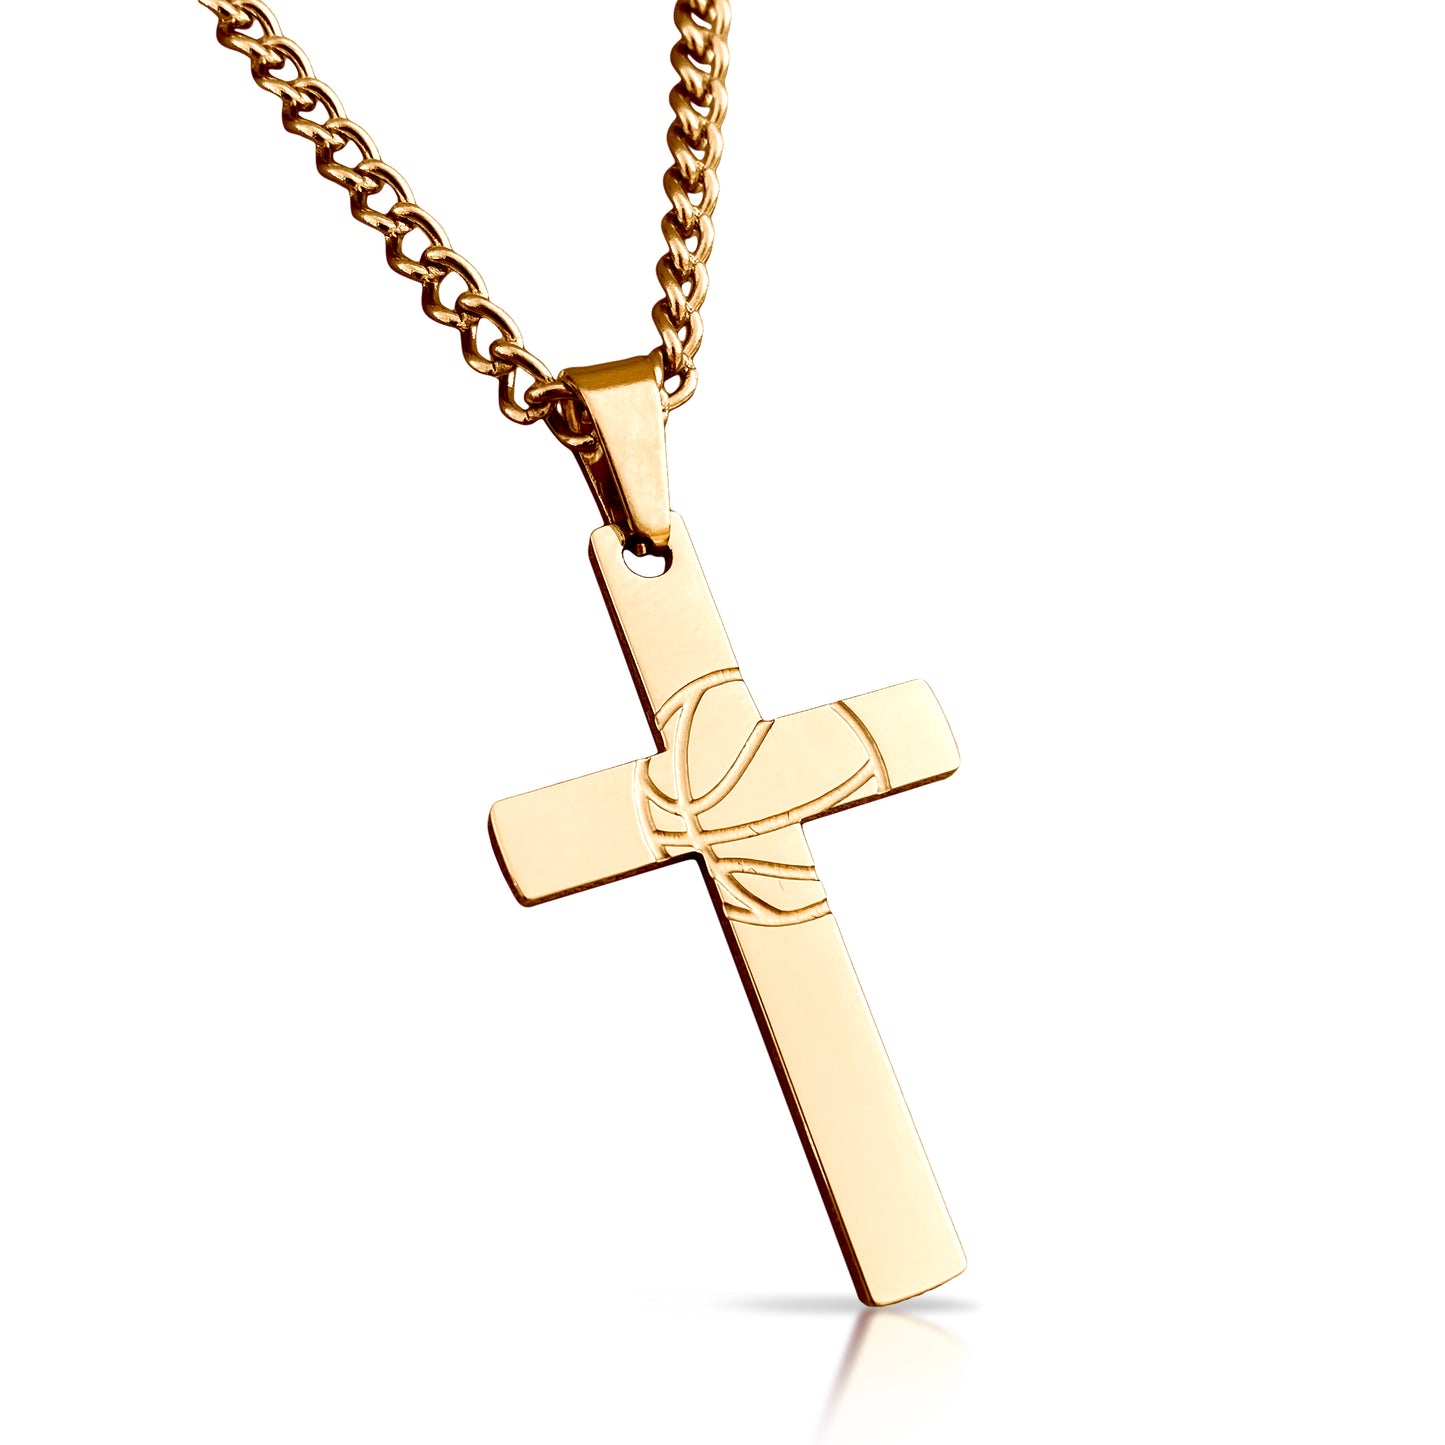 Basketball Cross Pendant With Chain Necklace - 14K Gold Plated Stainless Steel